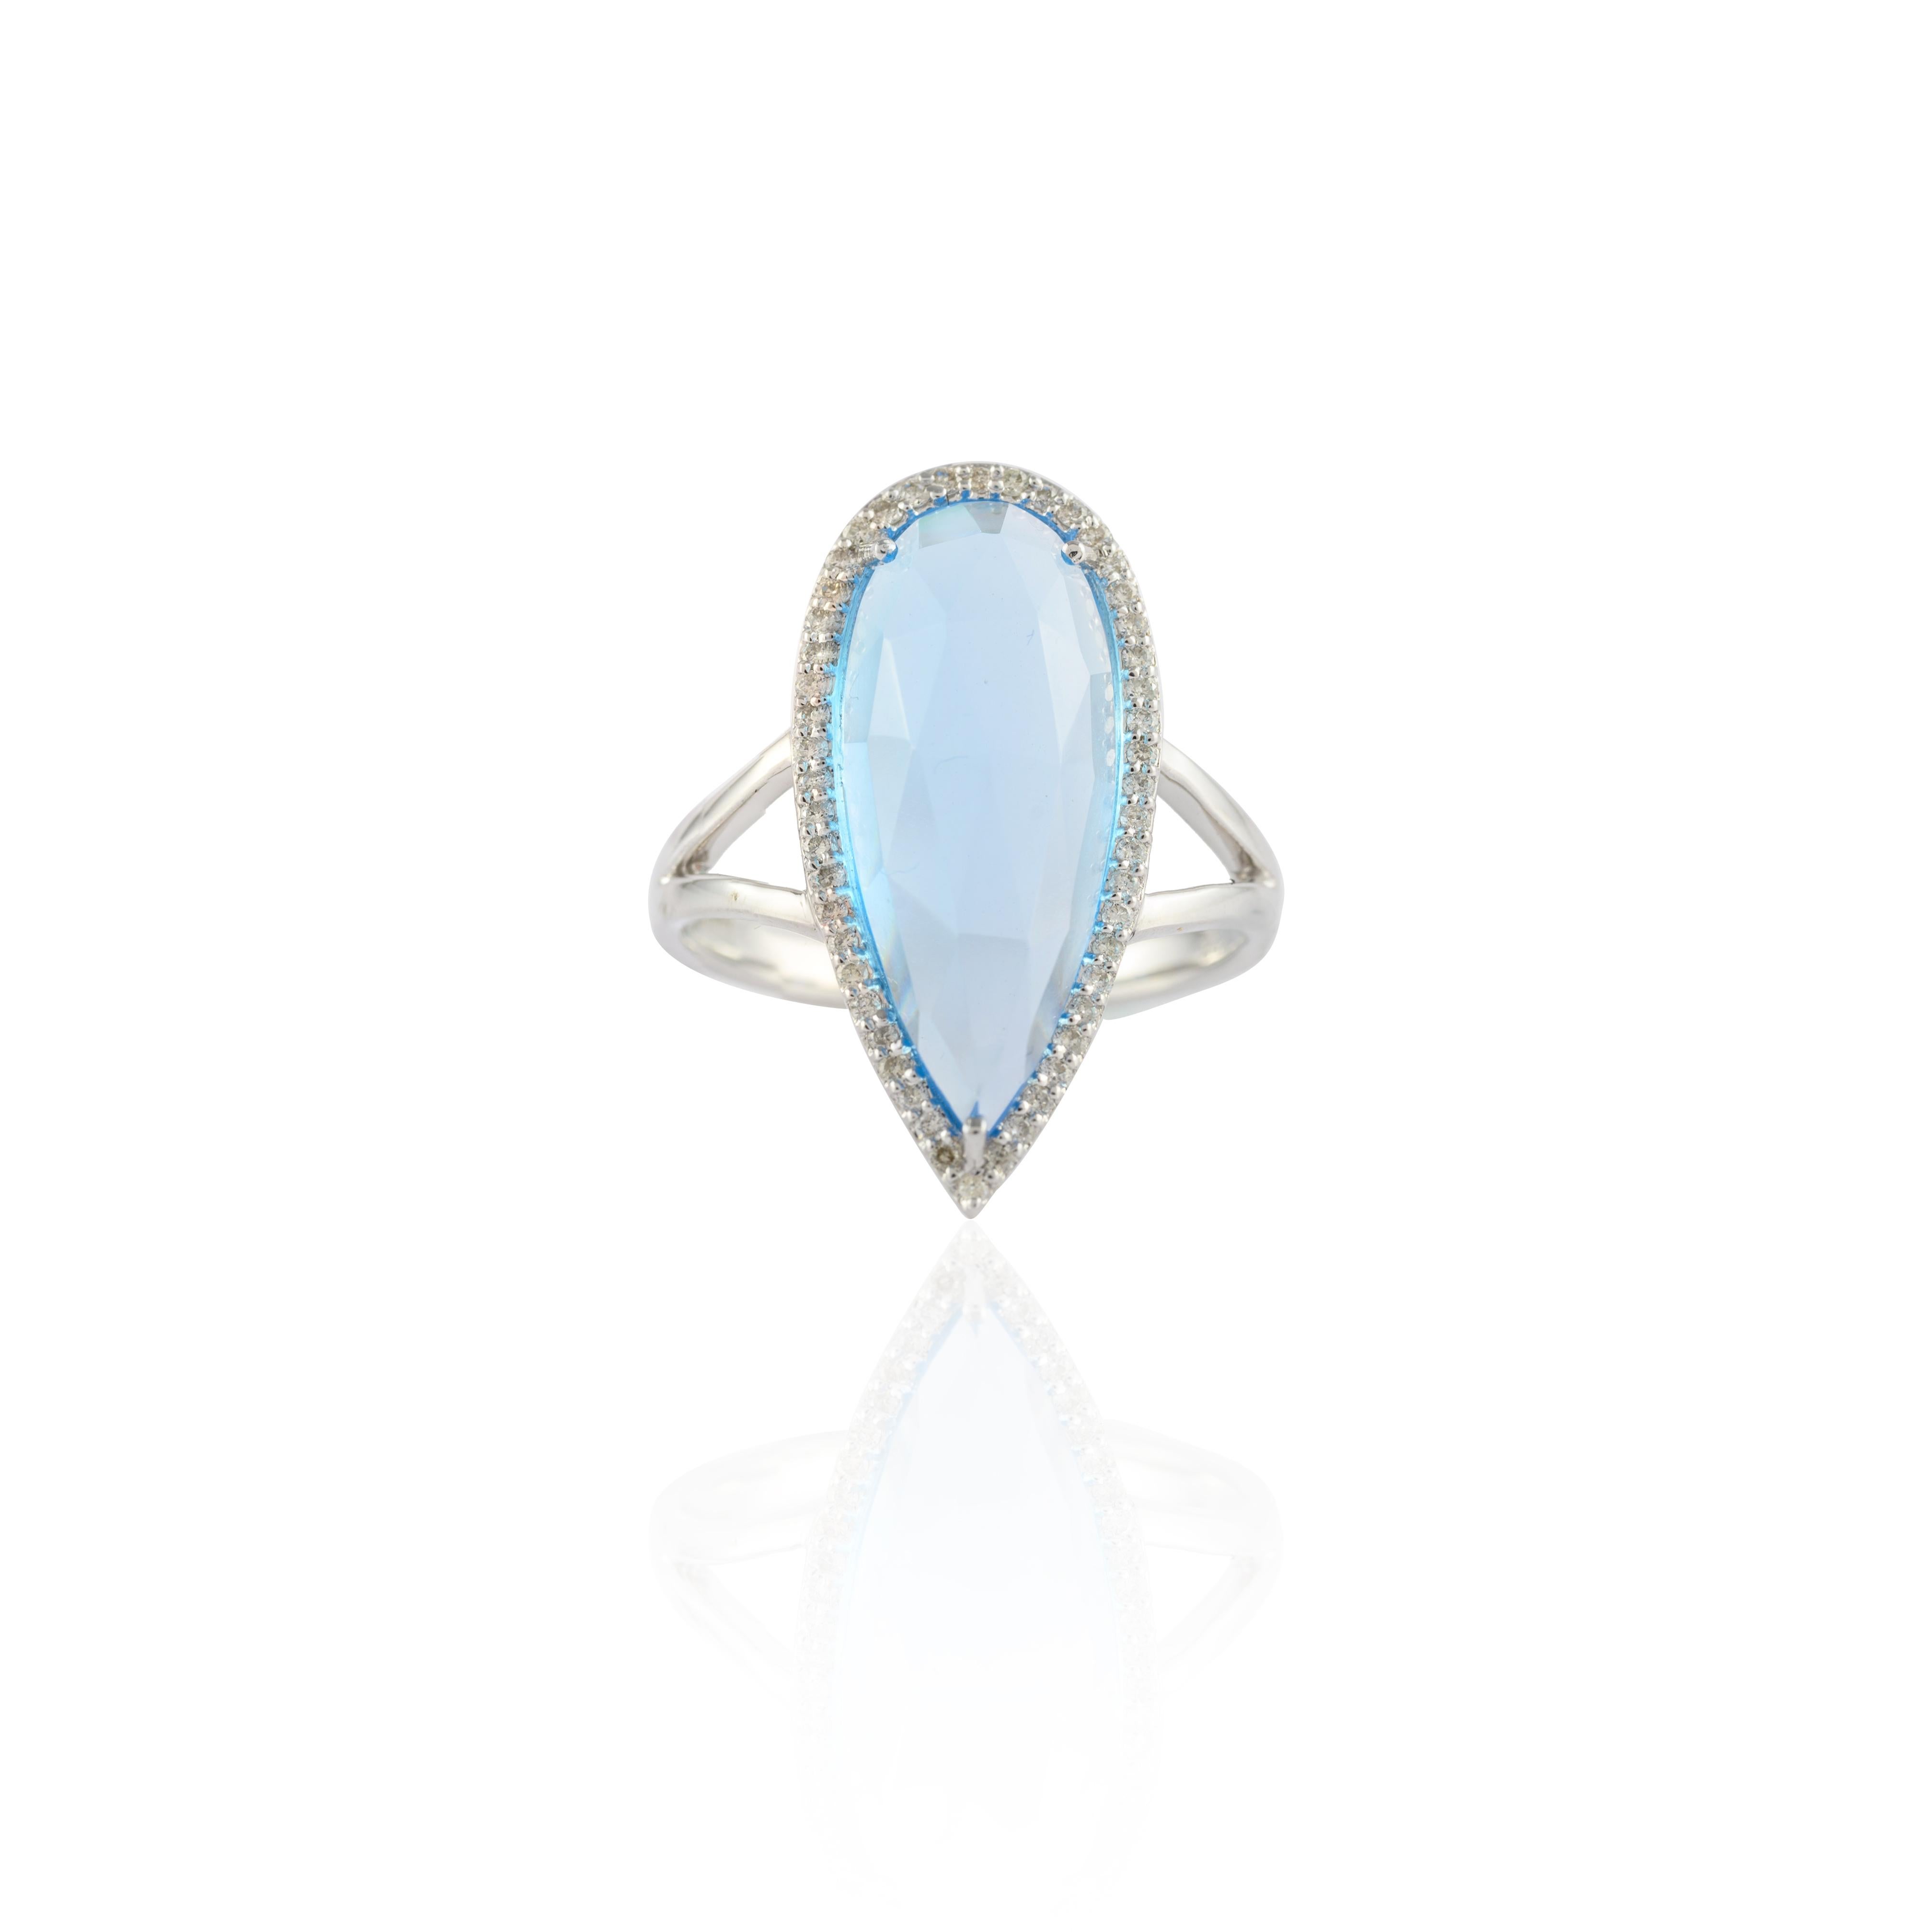 For Sale:  Glitzy 6.82 Carat Pear Blue Topaz Diamond Cocktail Ring in 14k Solid White Gold 3